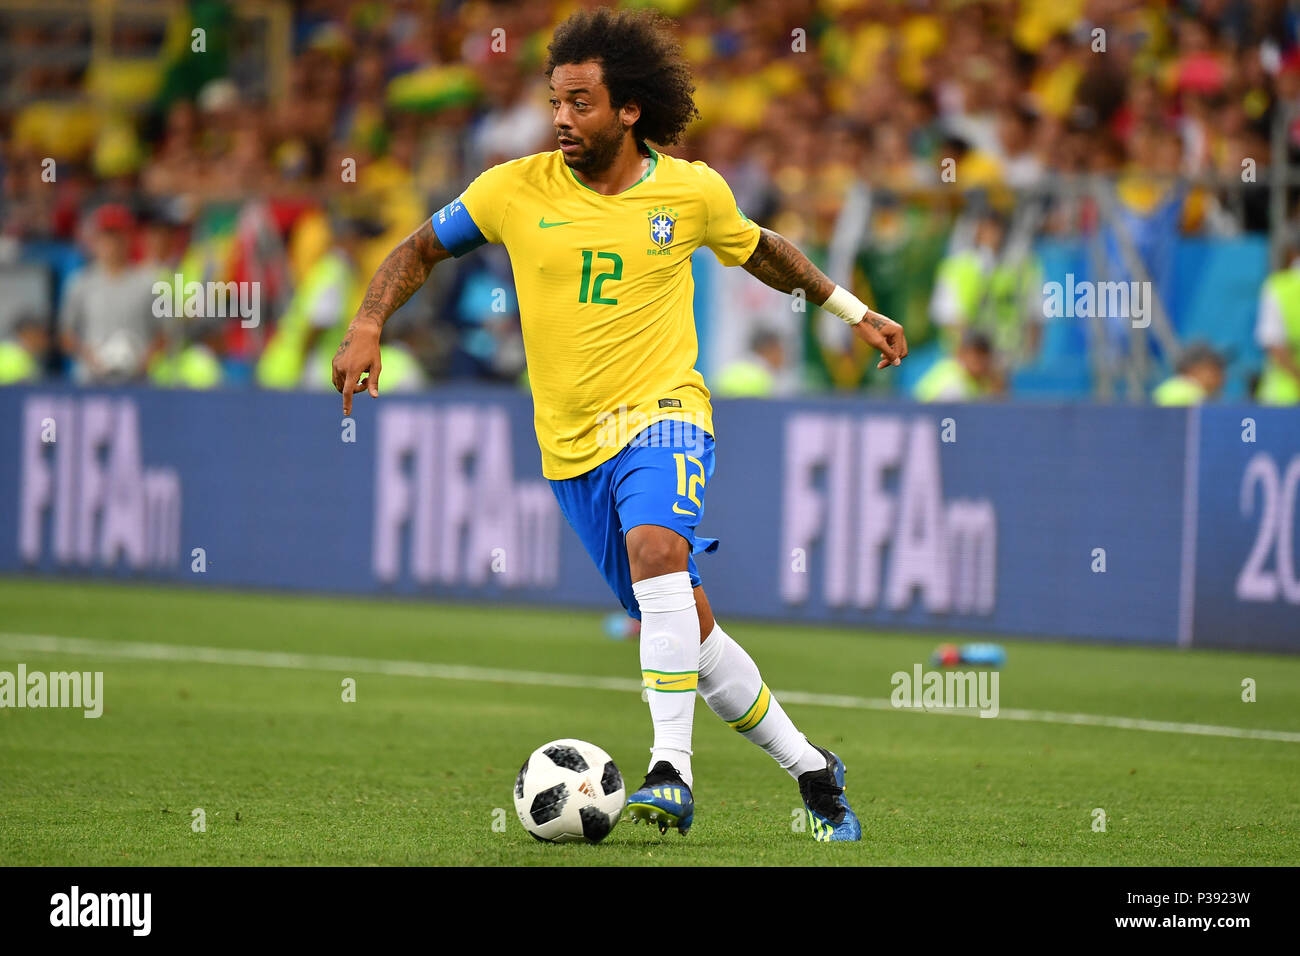 MARCELO (BRA), Action, Single Action, Frame, Cut Out, Full Body, Whole  Figure. Brazil (BRA) -Switzerland (SUI) 1-1, Preliminary Round, Group E,  match 09, on 17.06.2018 in Rostov-on-Don, Rostov Arena. Football World Cup